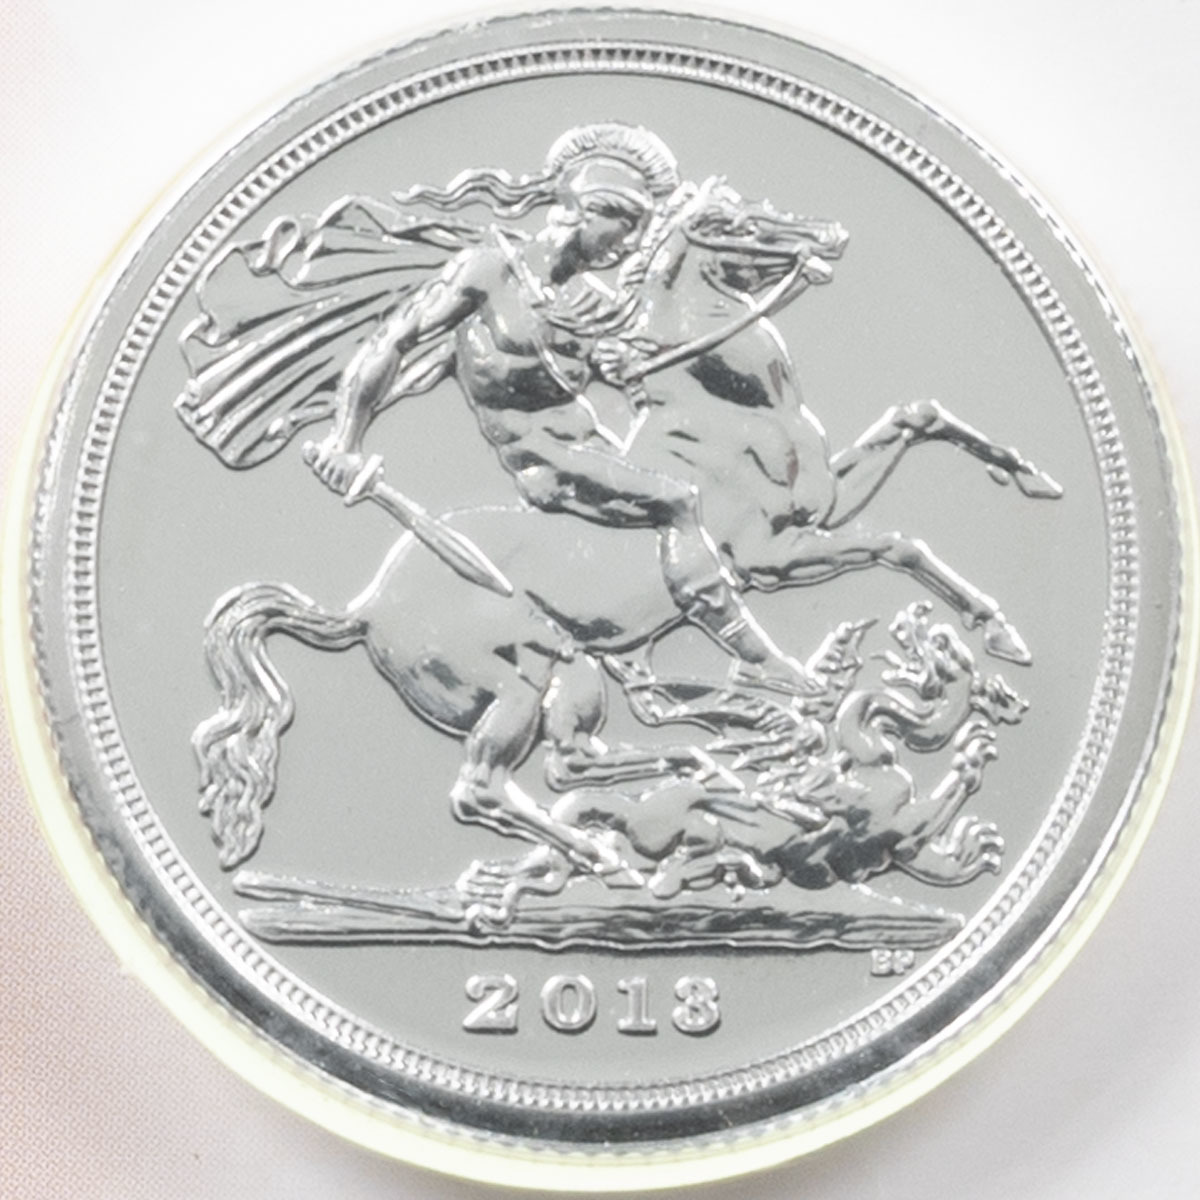 UK13FVS 2013 Saint George And The Dragon Sovereign Benedetto Pistrucci Twenty Pound Silver Brilliant Uncirculated Coin In Folder Reverse